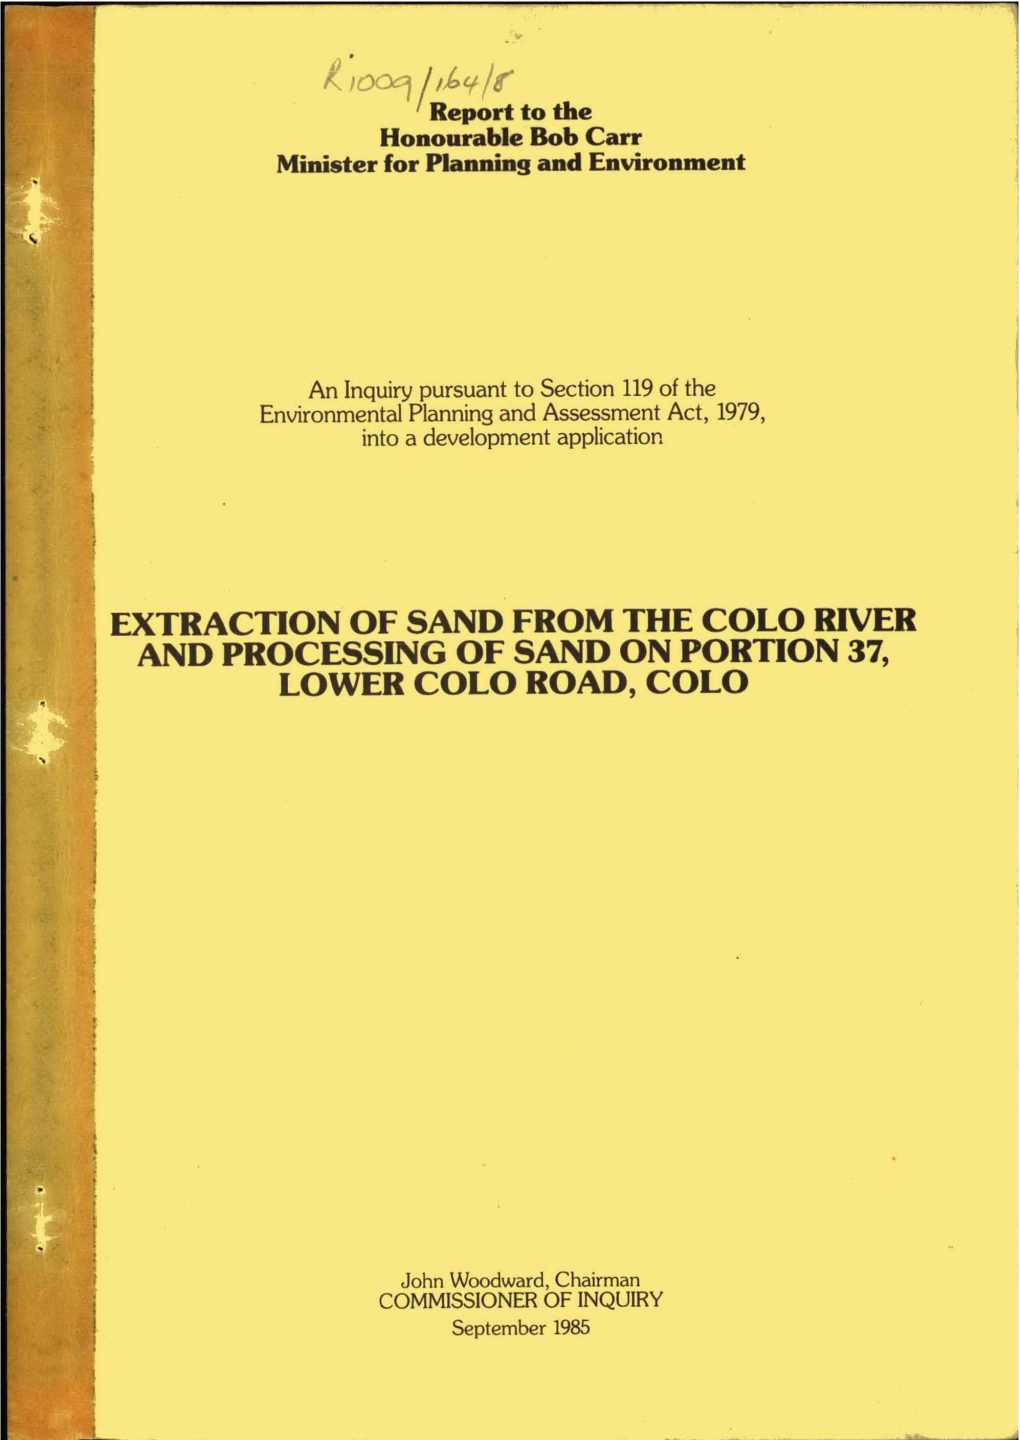 Extraction of Sand from the Colo River and Processing of Sand on Portion 37, Lower Colo Road, Colo